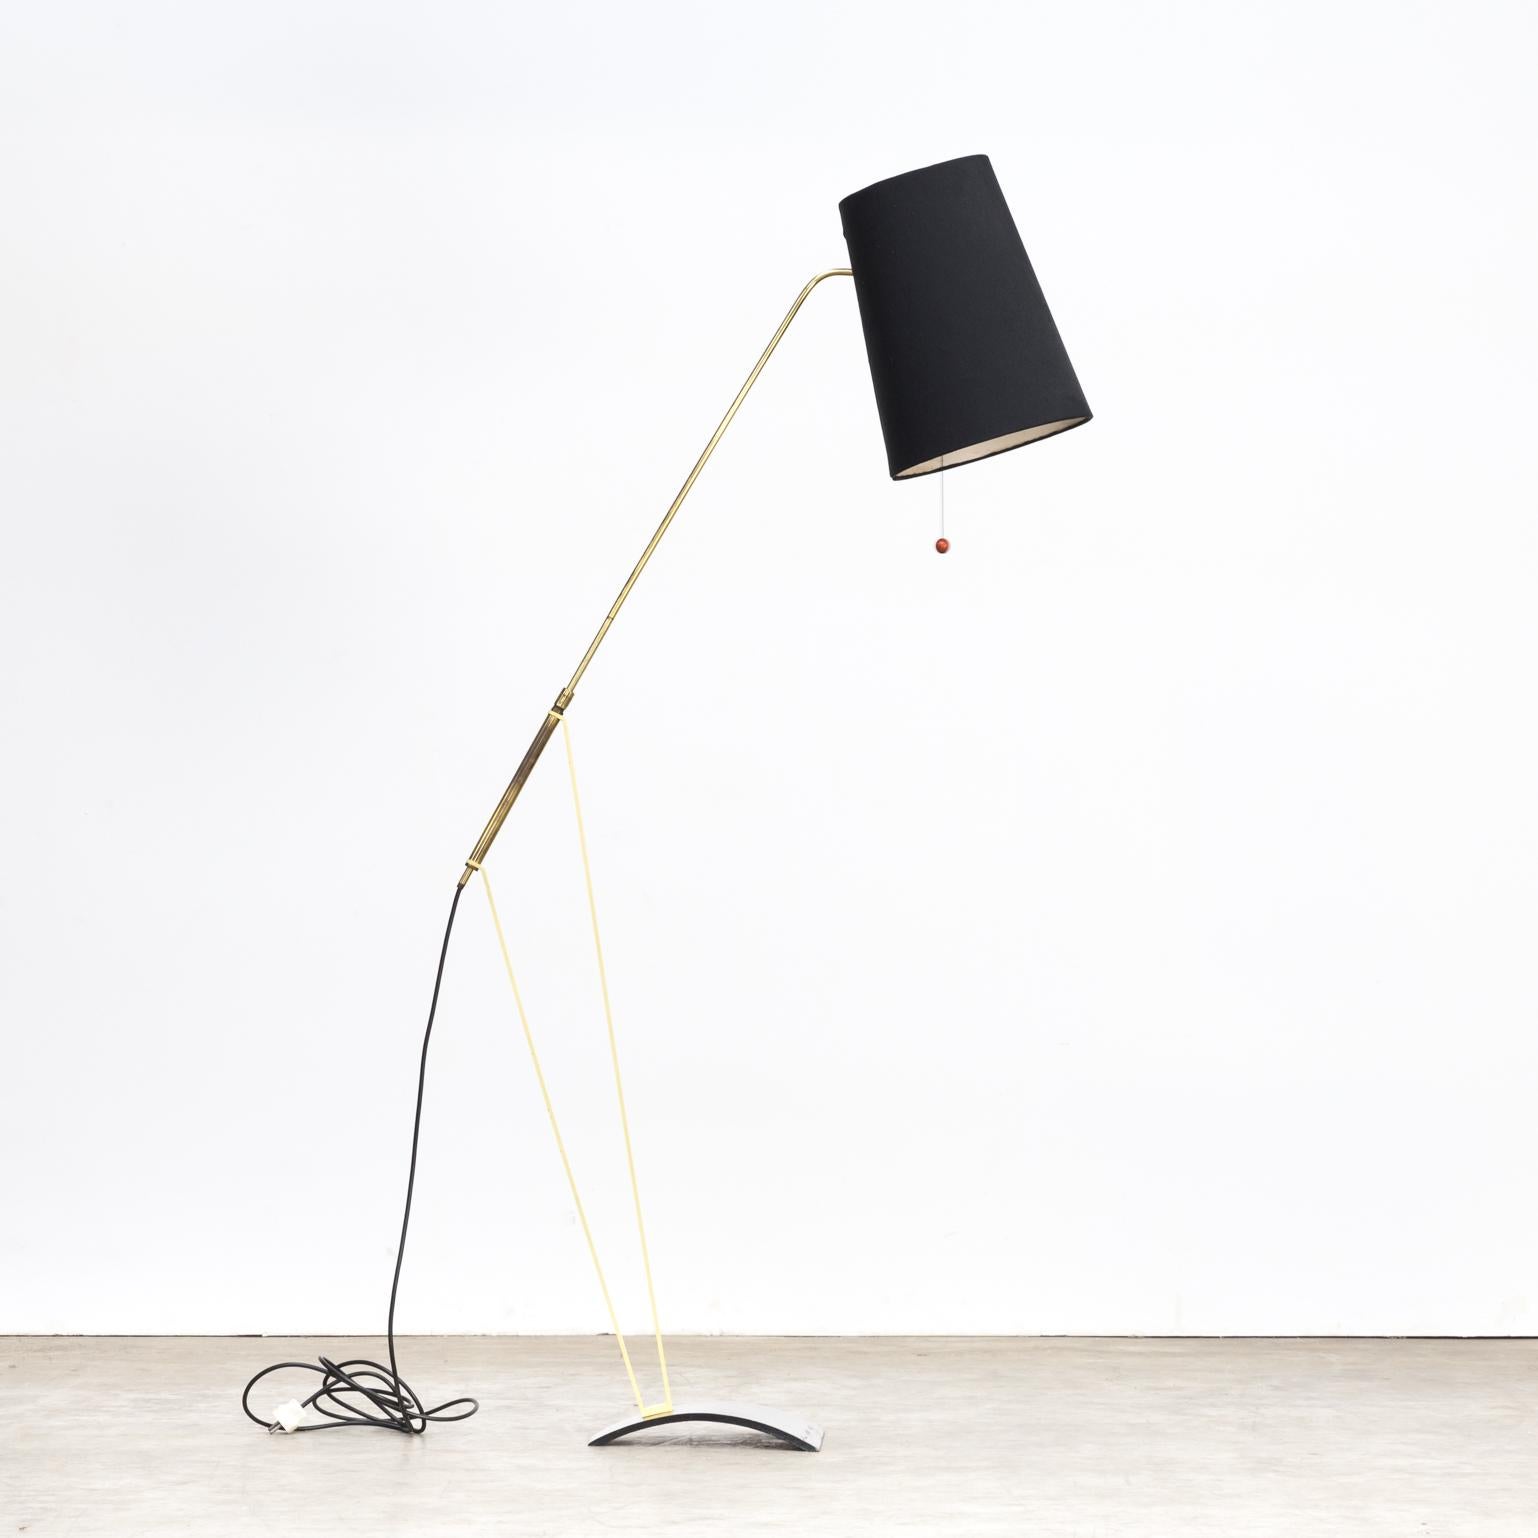 1950s Hans Bergström Floor Lamp with Adjustable Fabric Shade for Ateljé Lyktan For Sale 1